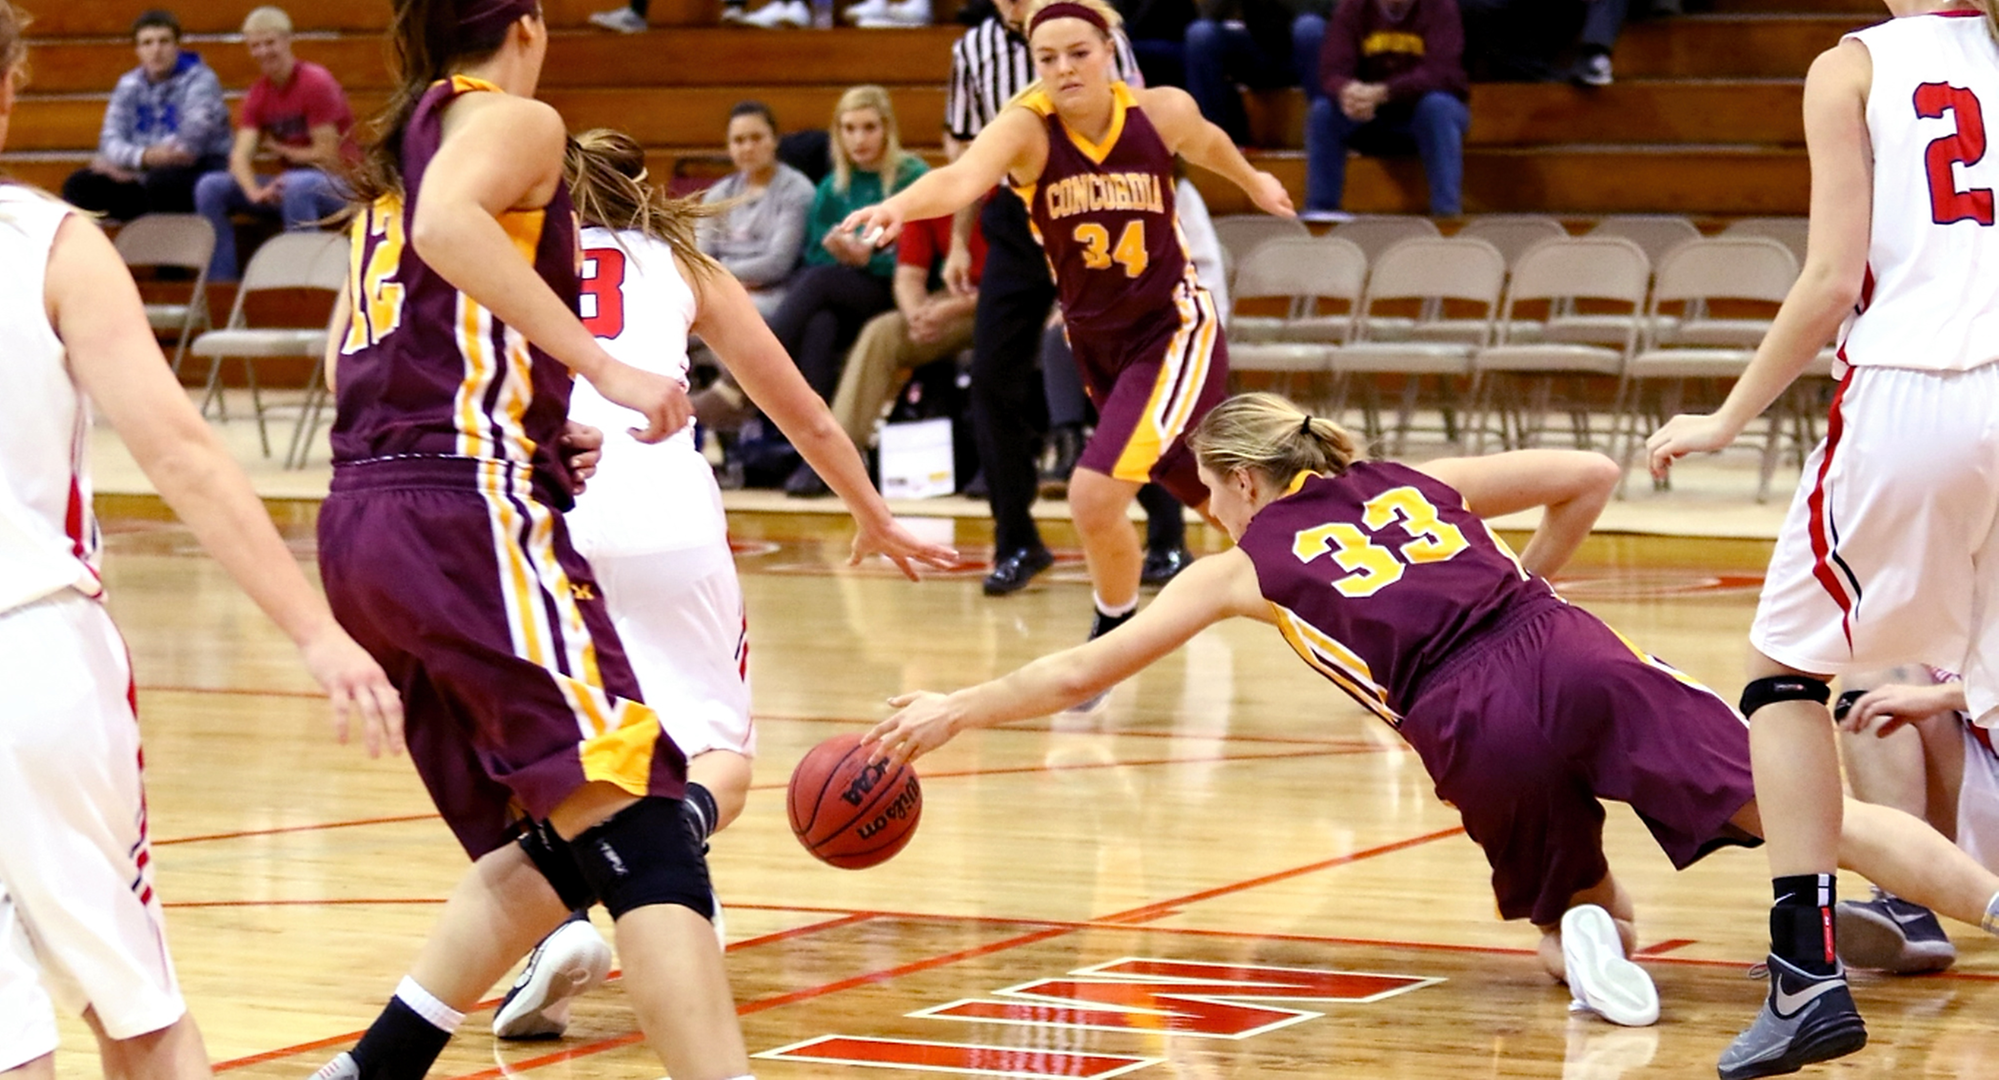 Senior Jenna Januschka dives on the floor after a loose ball in the Cobbers' game at St. Mary's. Januschka had a season-high 18 points for CC. (Photo courtesy of Ryan Coleman, D3photography.com)